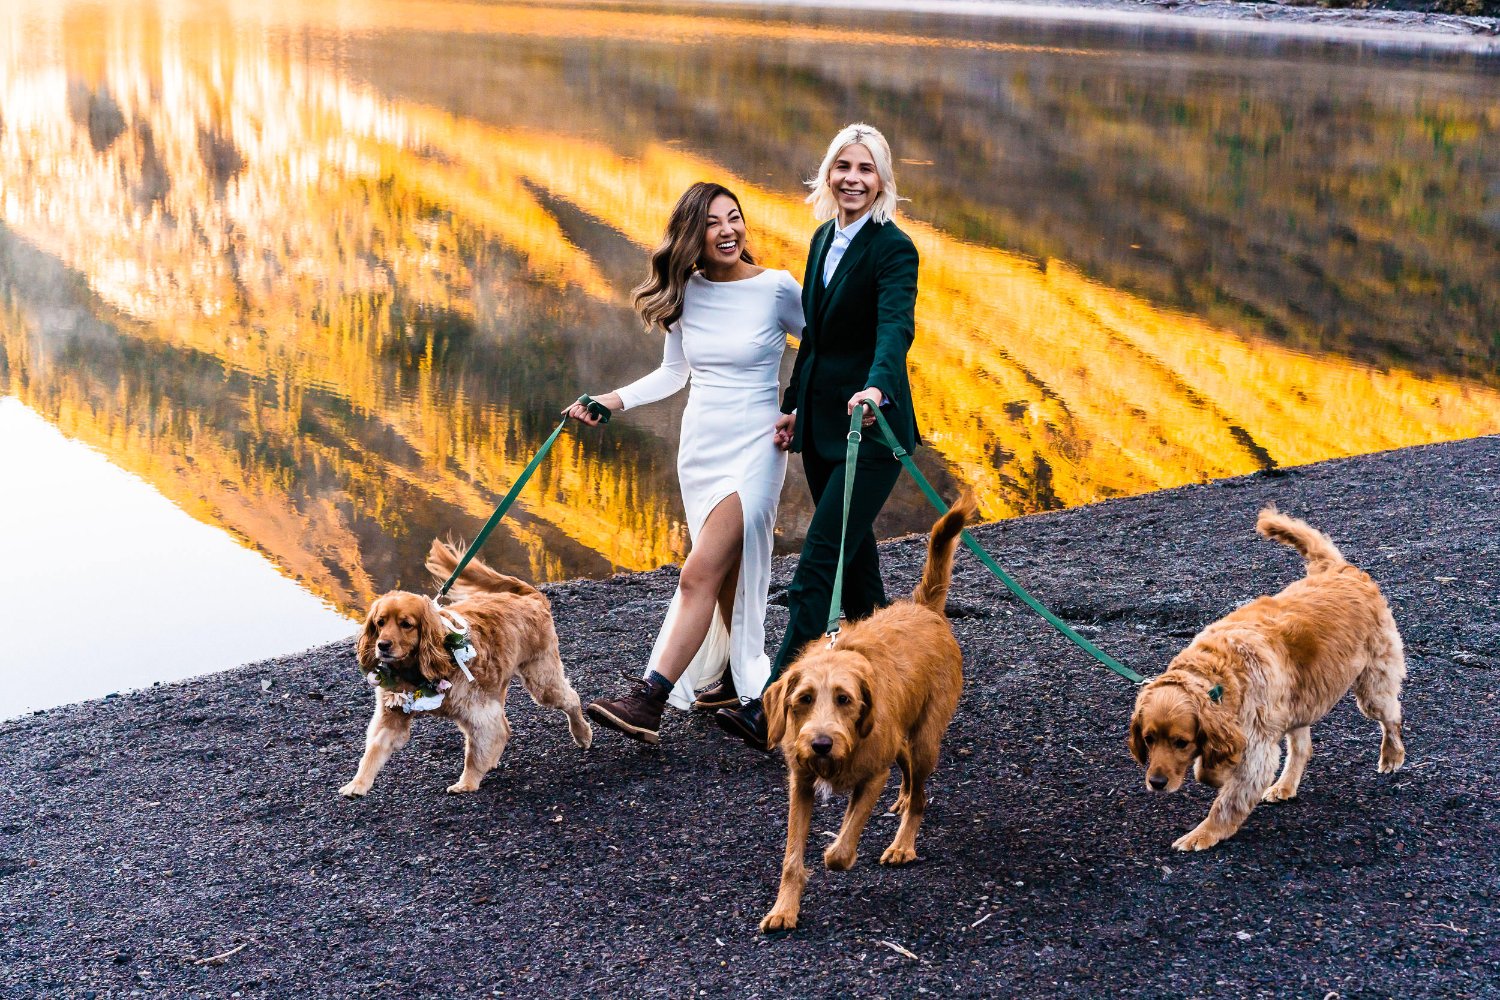 Two brides elopement photos in front of a lake, walking their dogs.